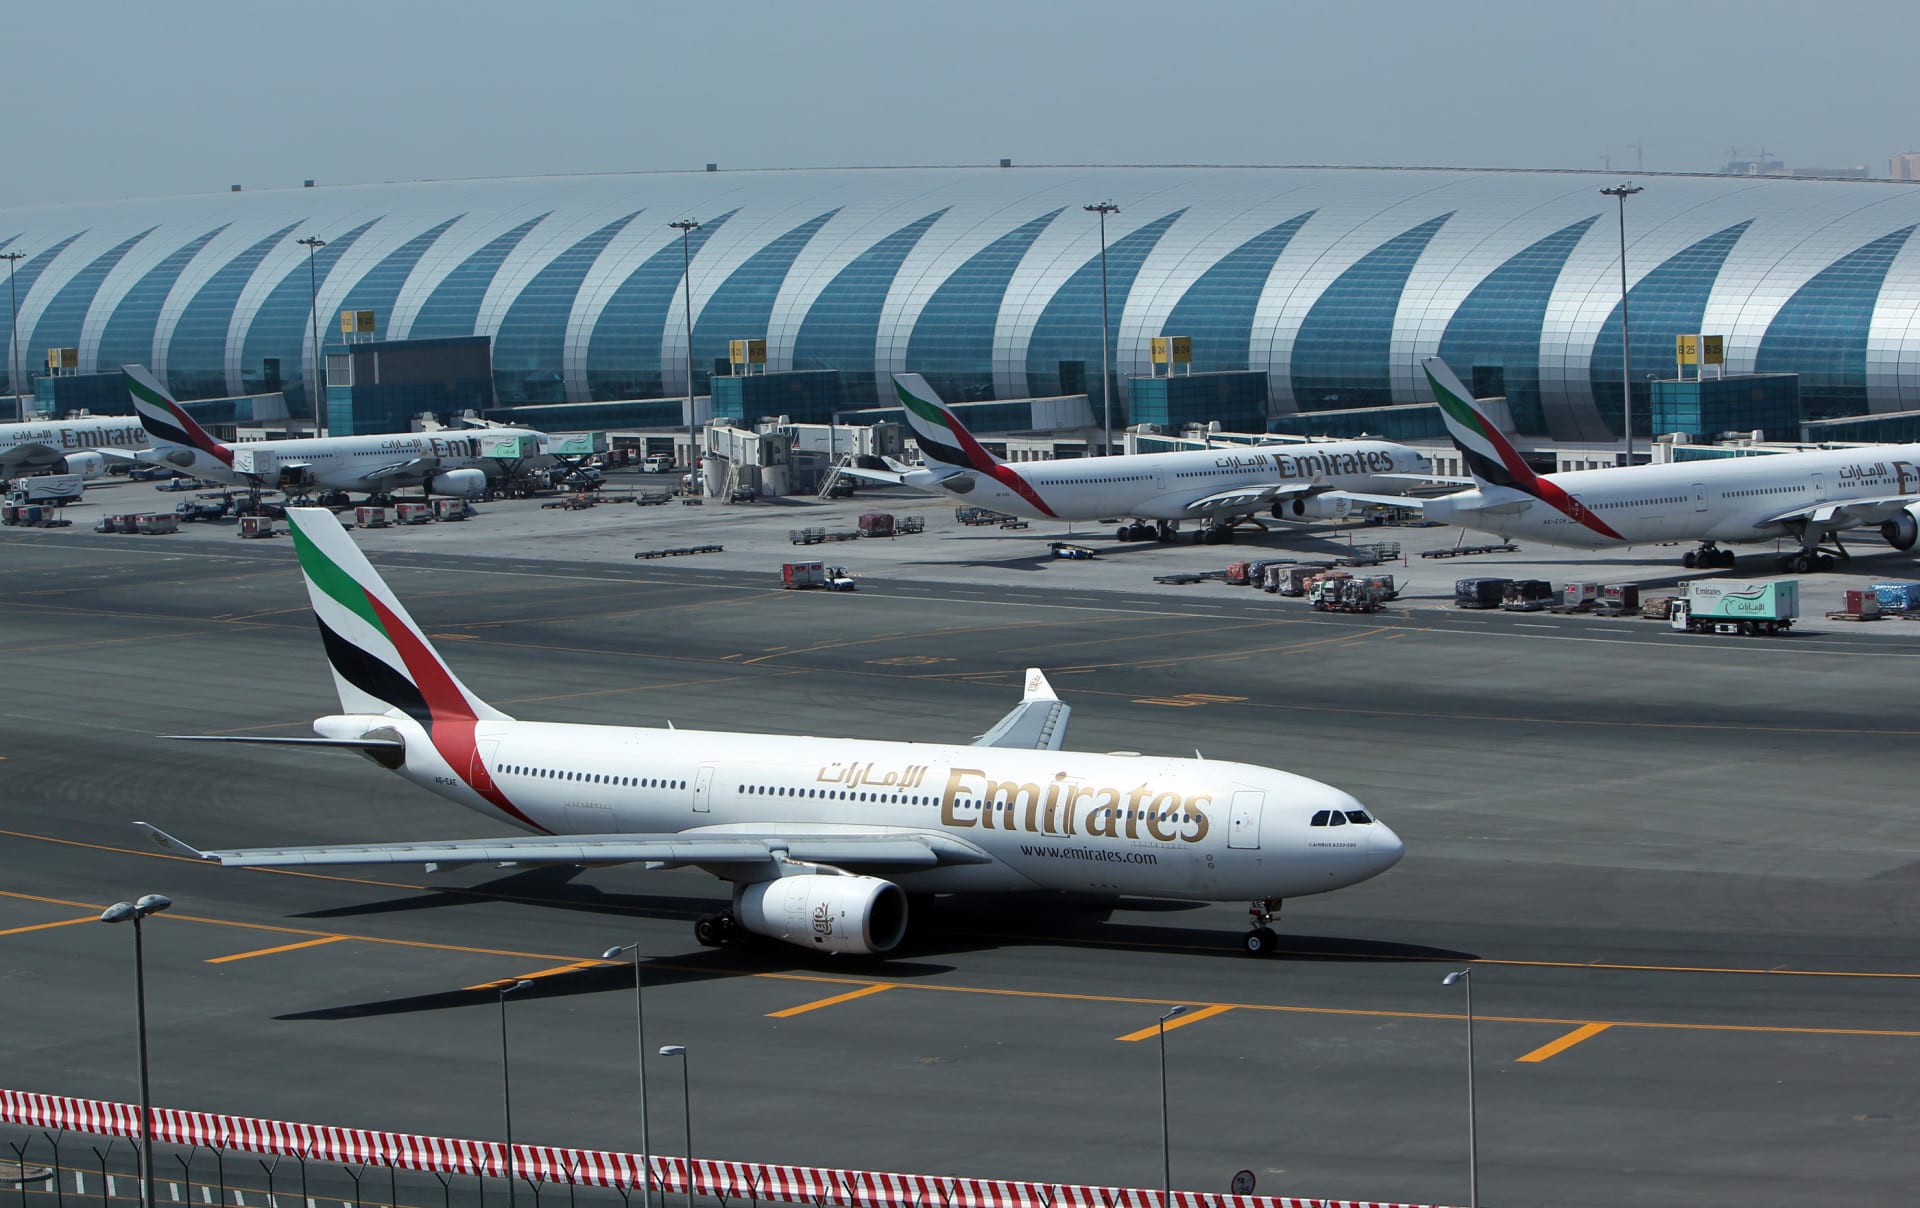 Photo: Dubai Airports urges passengers not to arrive at the airport unless flights are confirmed